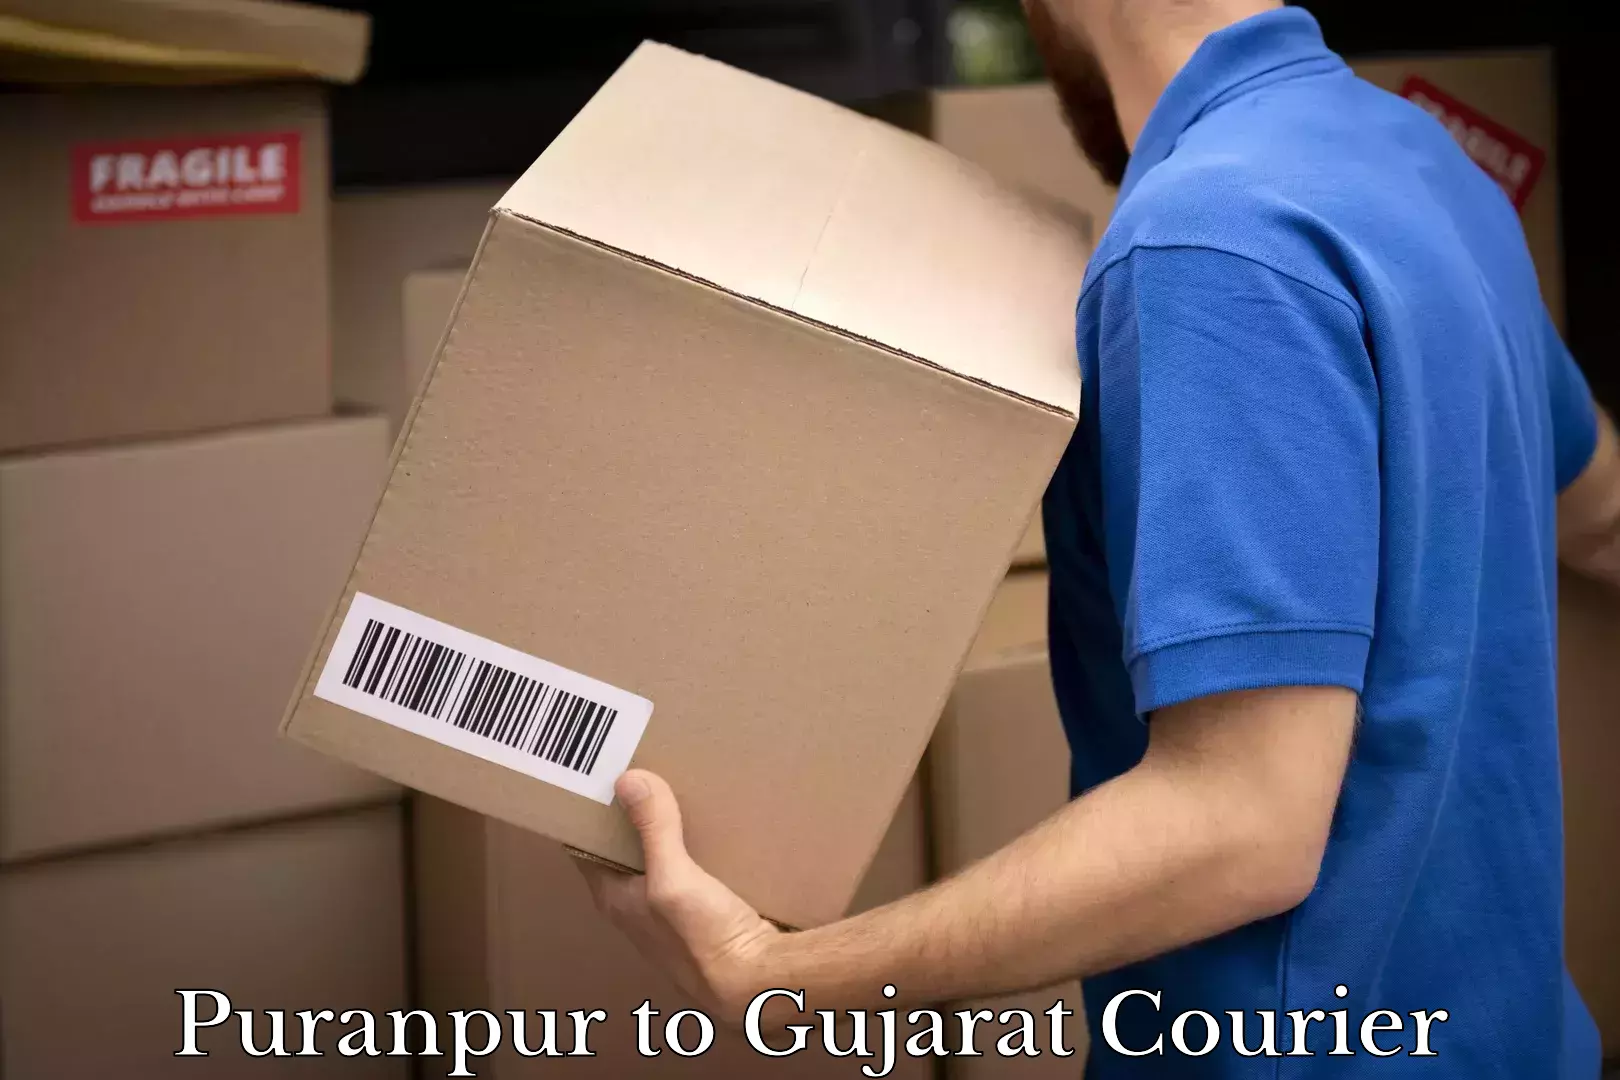 Automated parcel services Puranpur to Gujarat